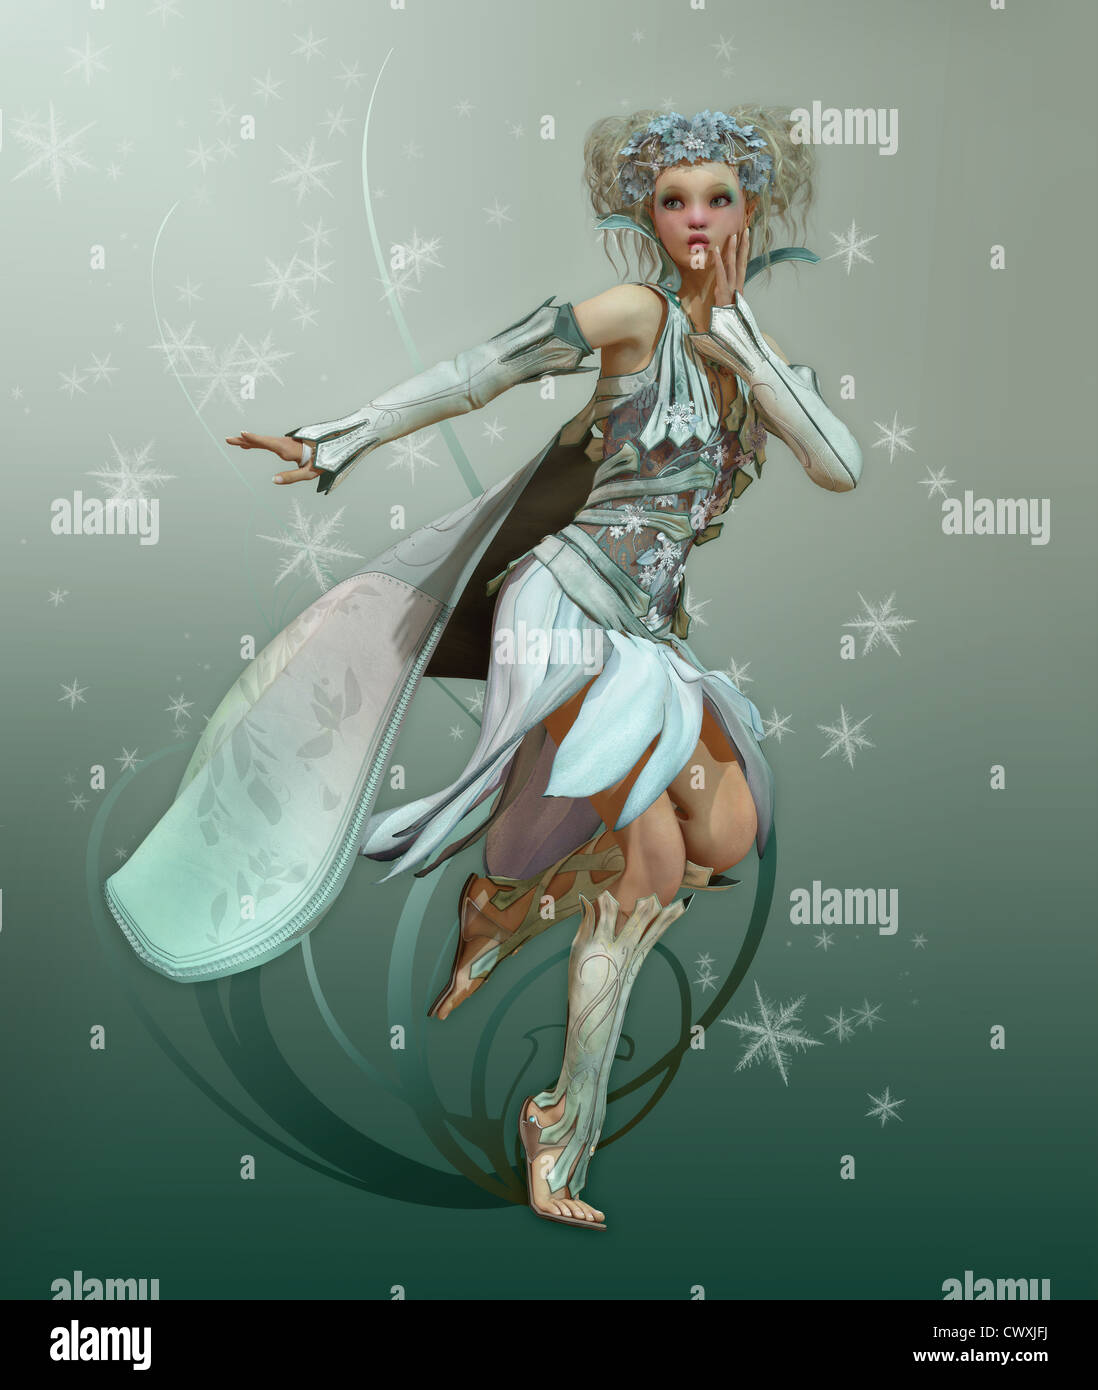 a graceful fairy with white dress and cape Stock Photo